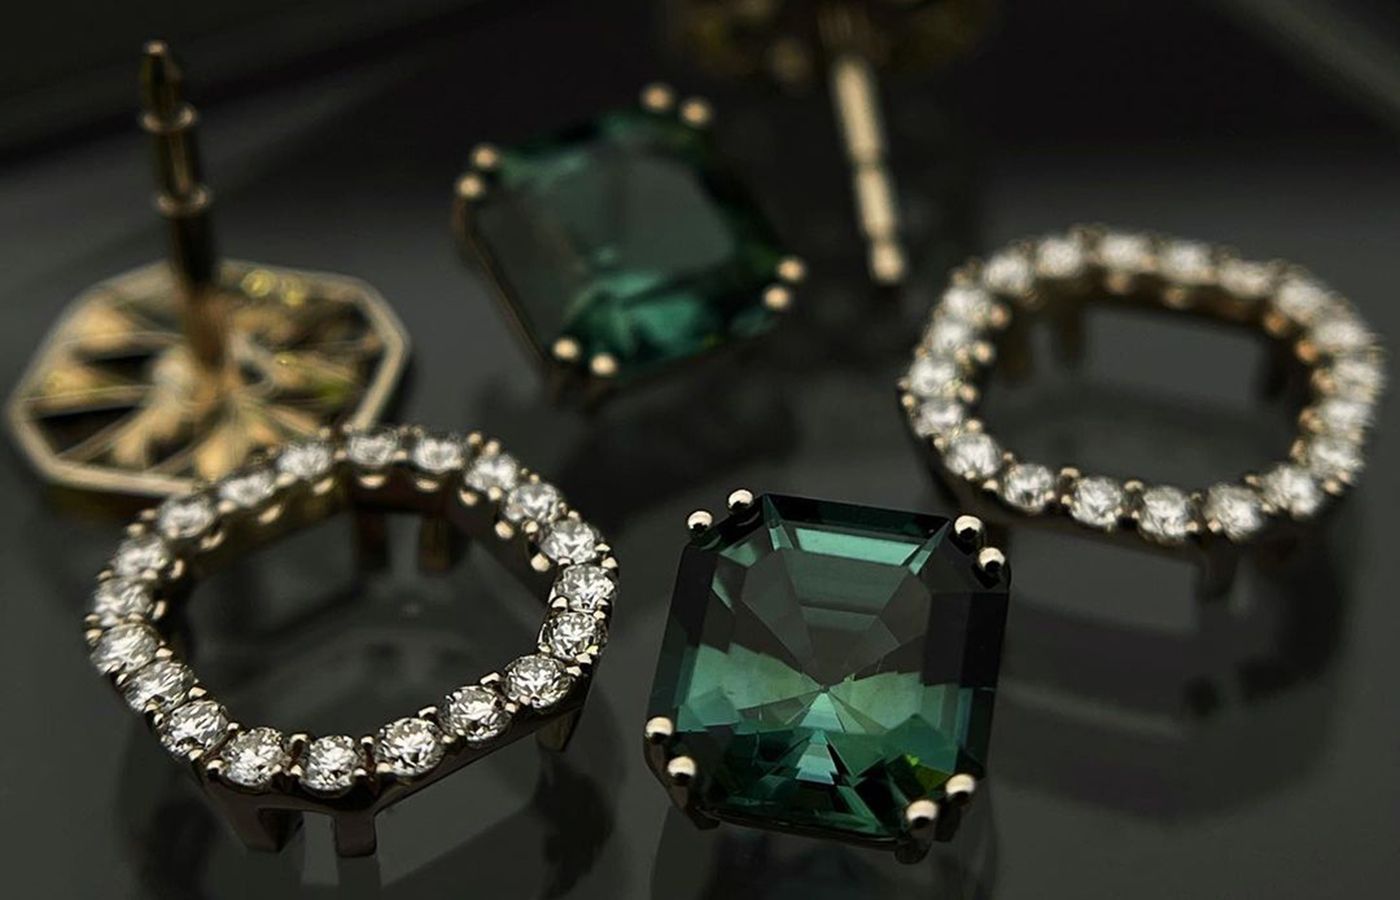 Gemstone jewellery in the process of being brought to life at the International Jewellery School in St Petersburg